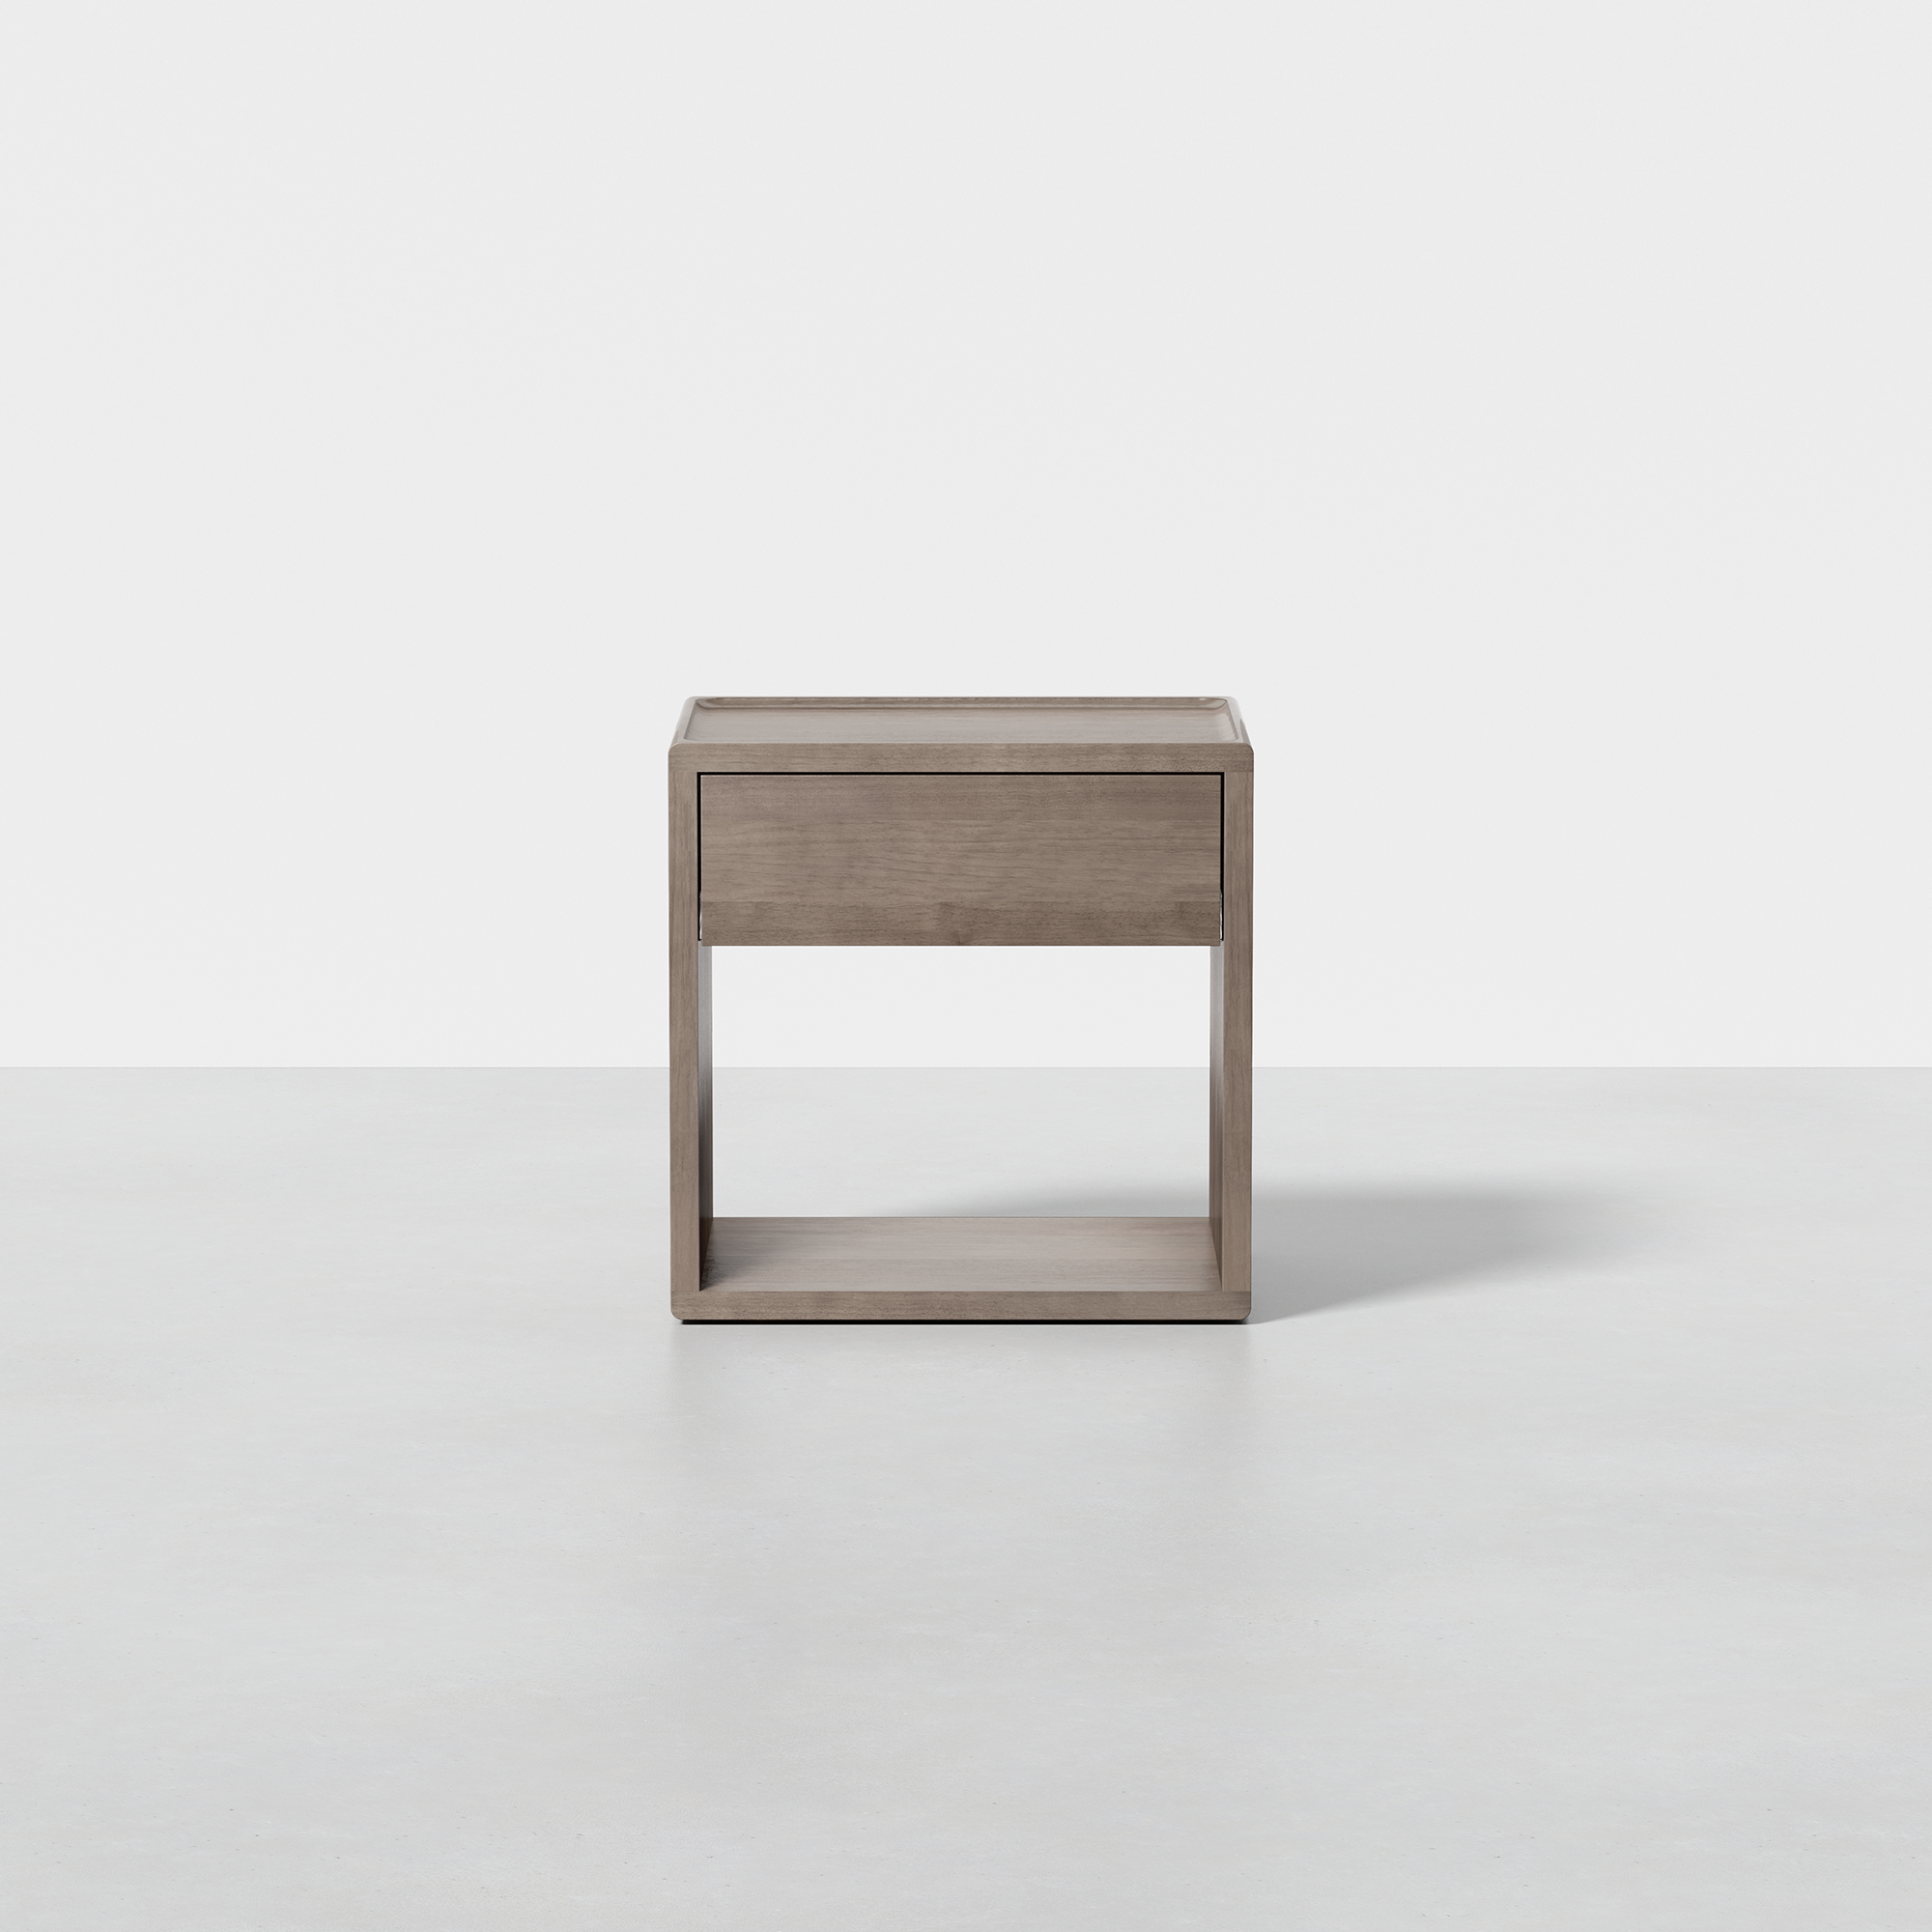 PDP Image: The Nightstand (Grey) - Render - Front